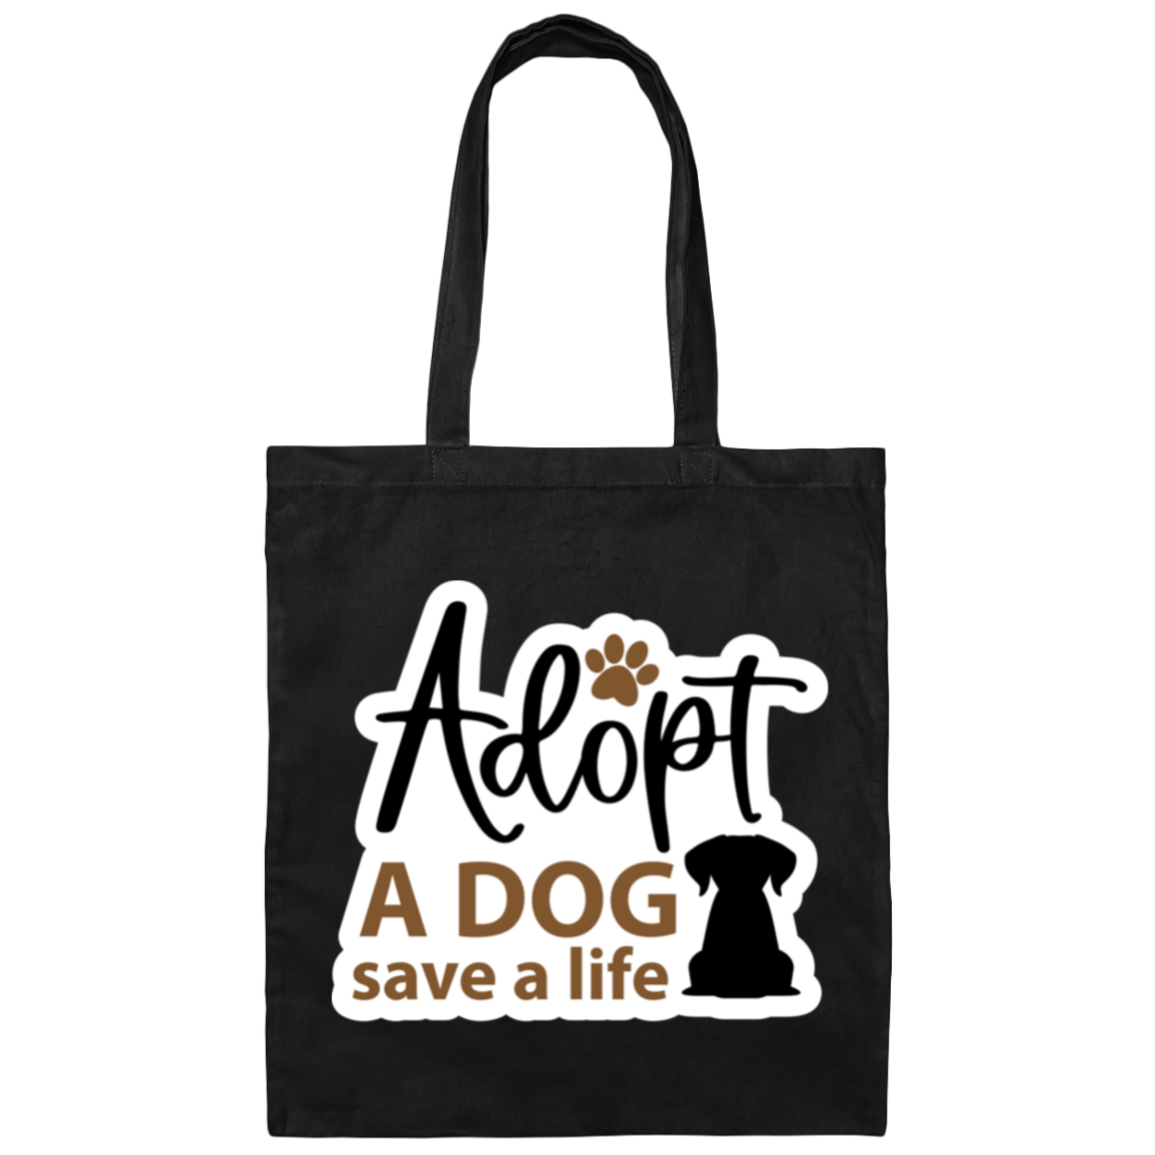 Adopt a Dog Save a Life Rescue Canvas Tote Bag